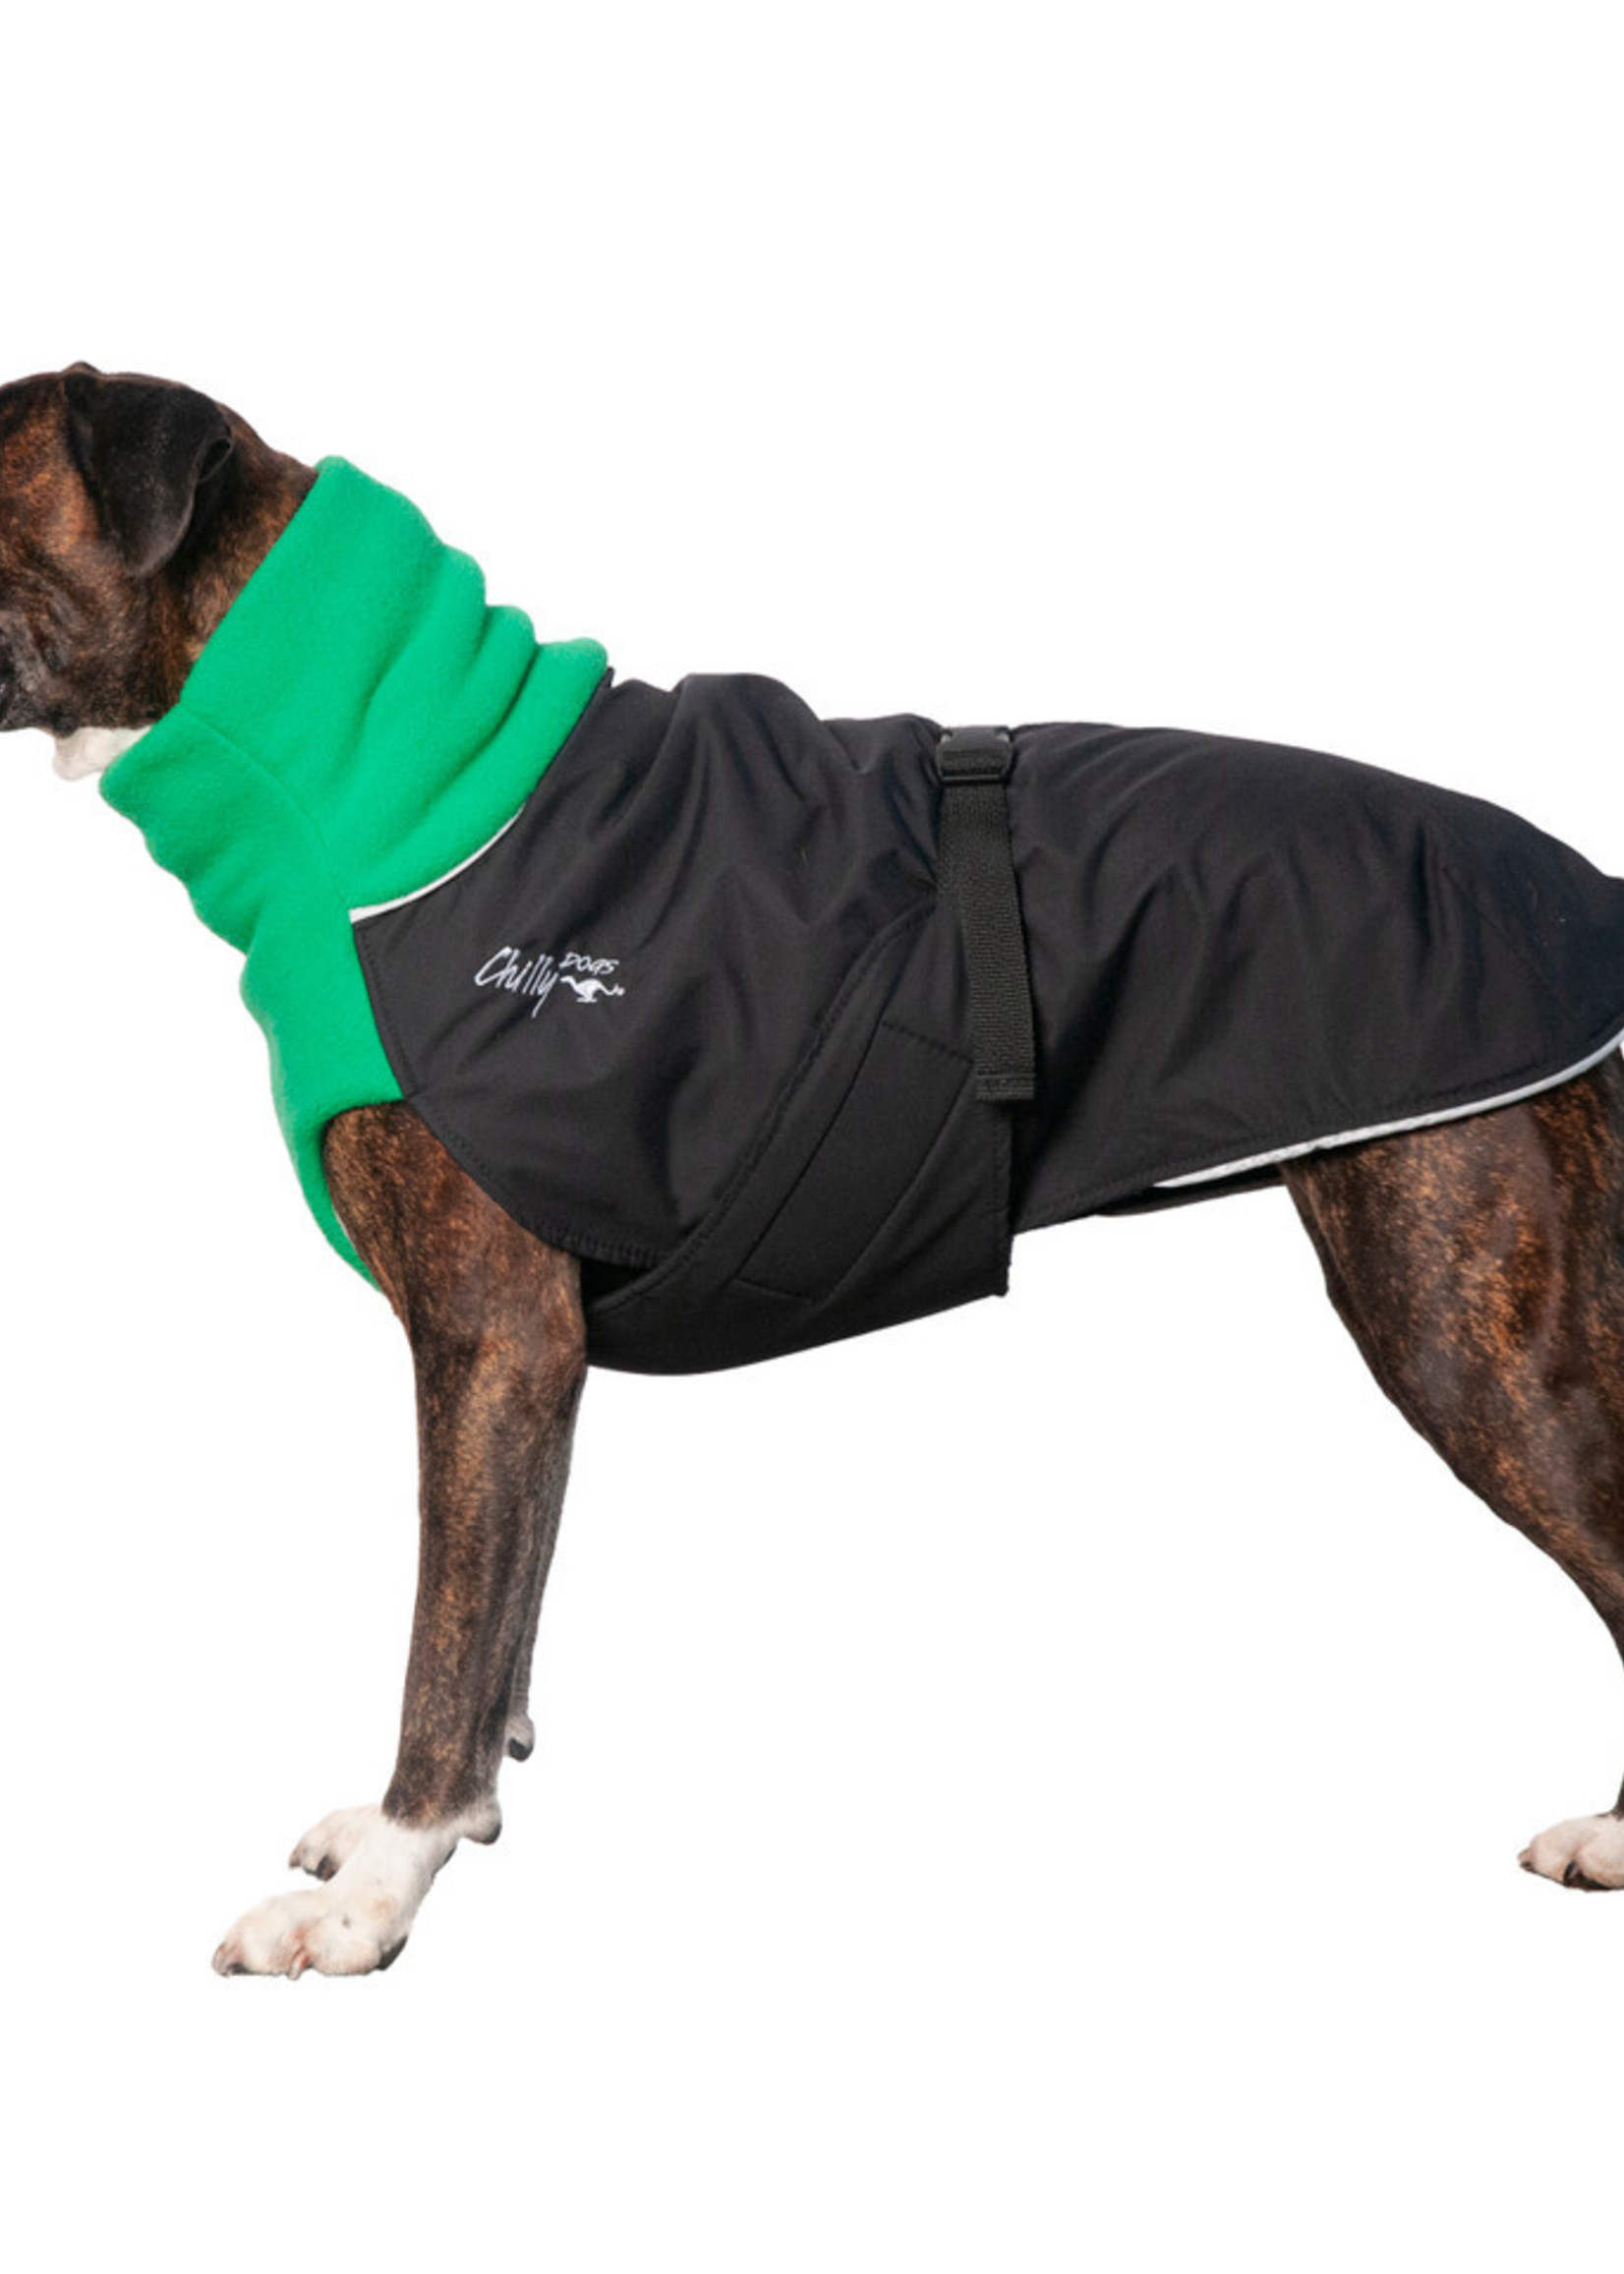 Chilly Dogs Chilly Dogs Great White North Coat Green Standard 24